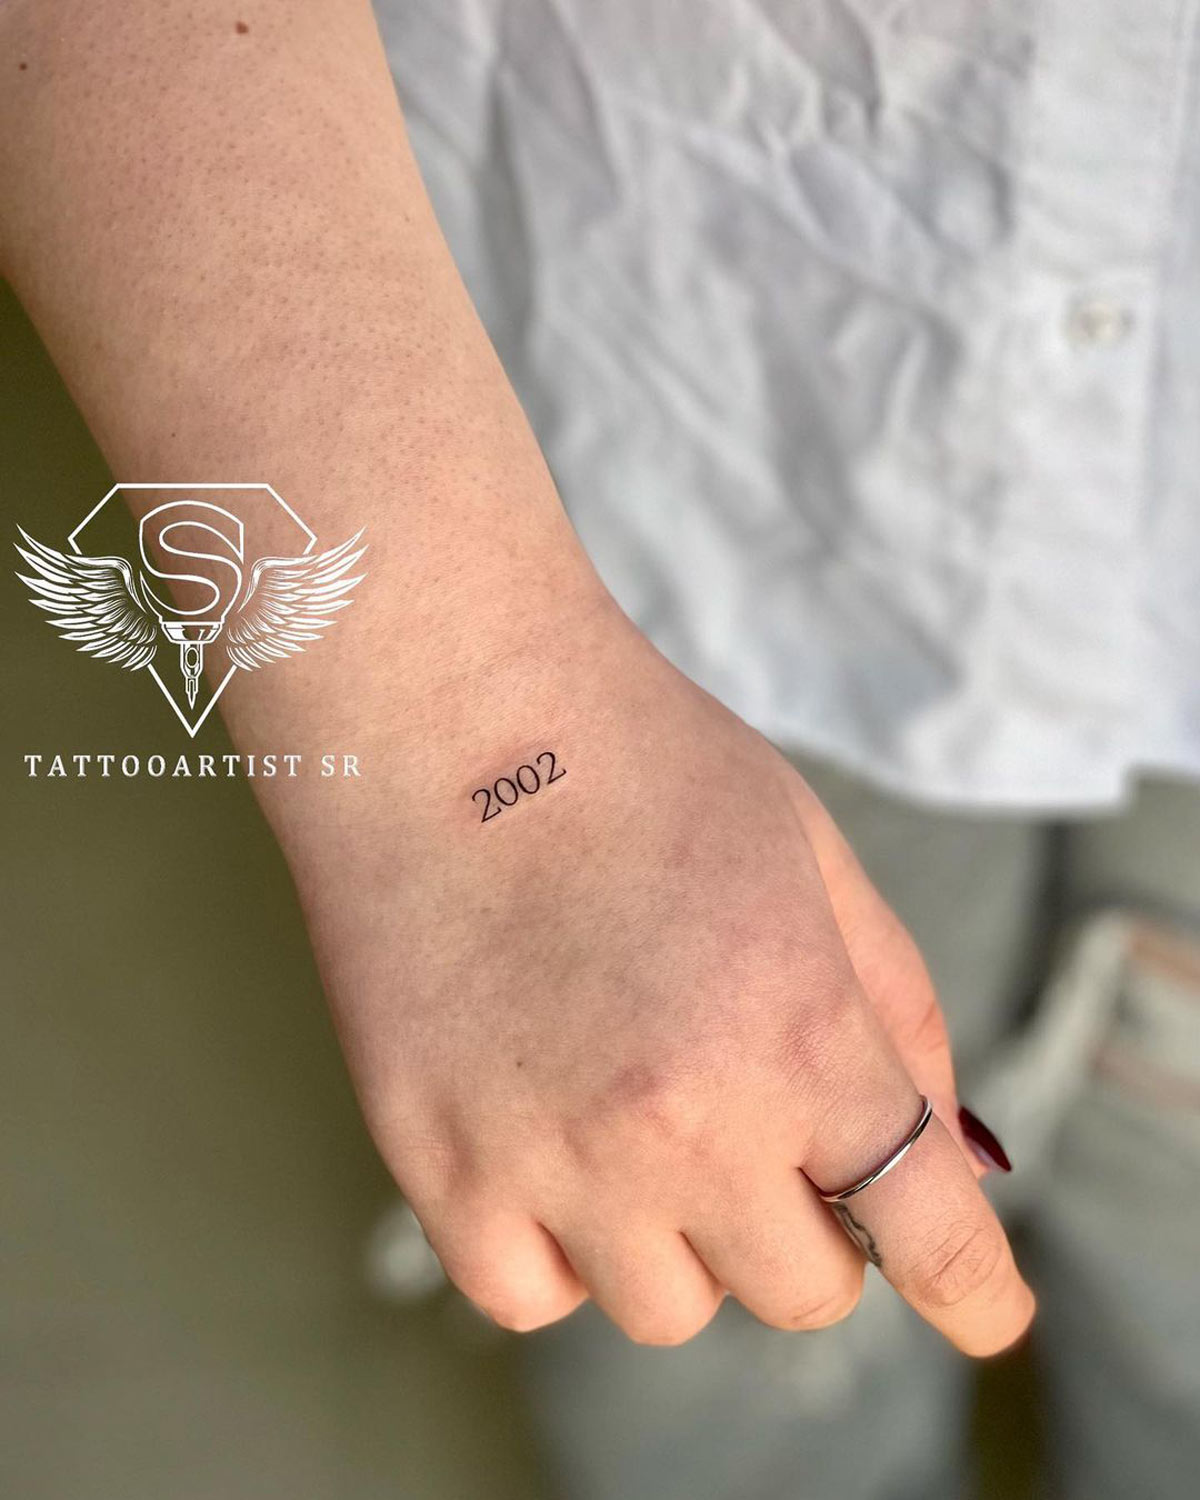 Wrist Tattoo Pain Scale, Placement Tips, & More